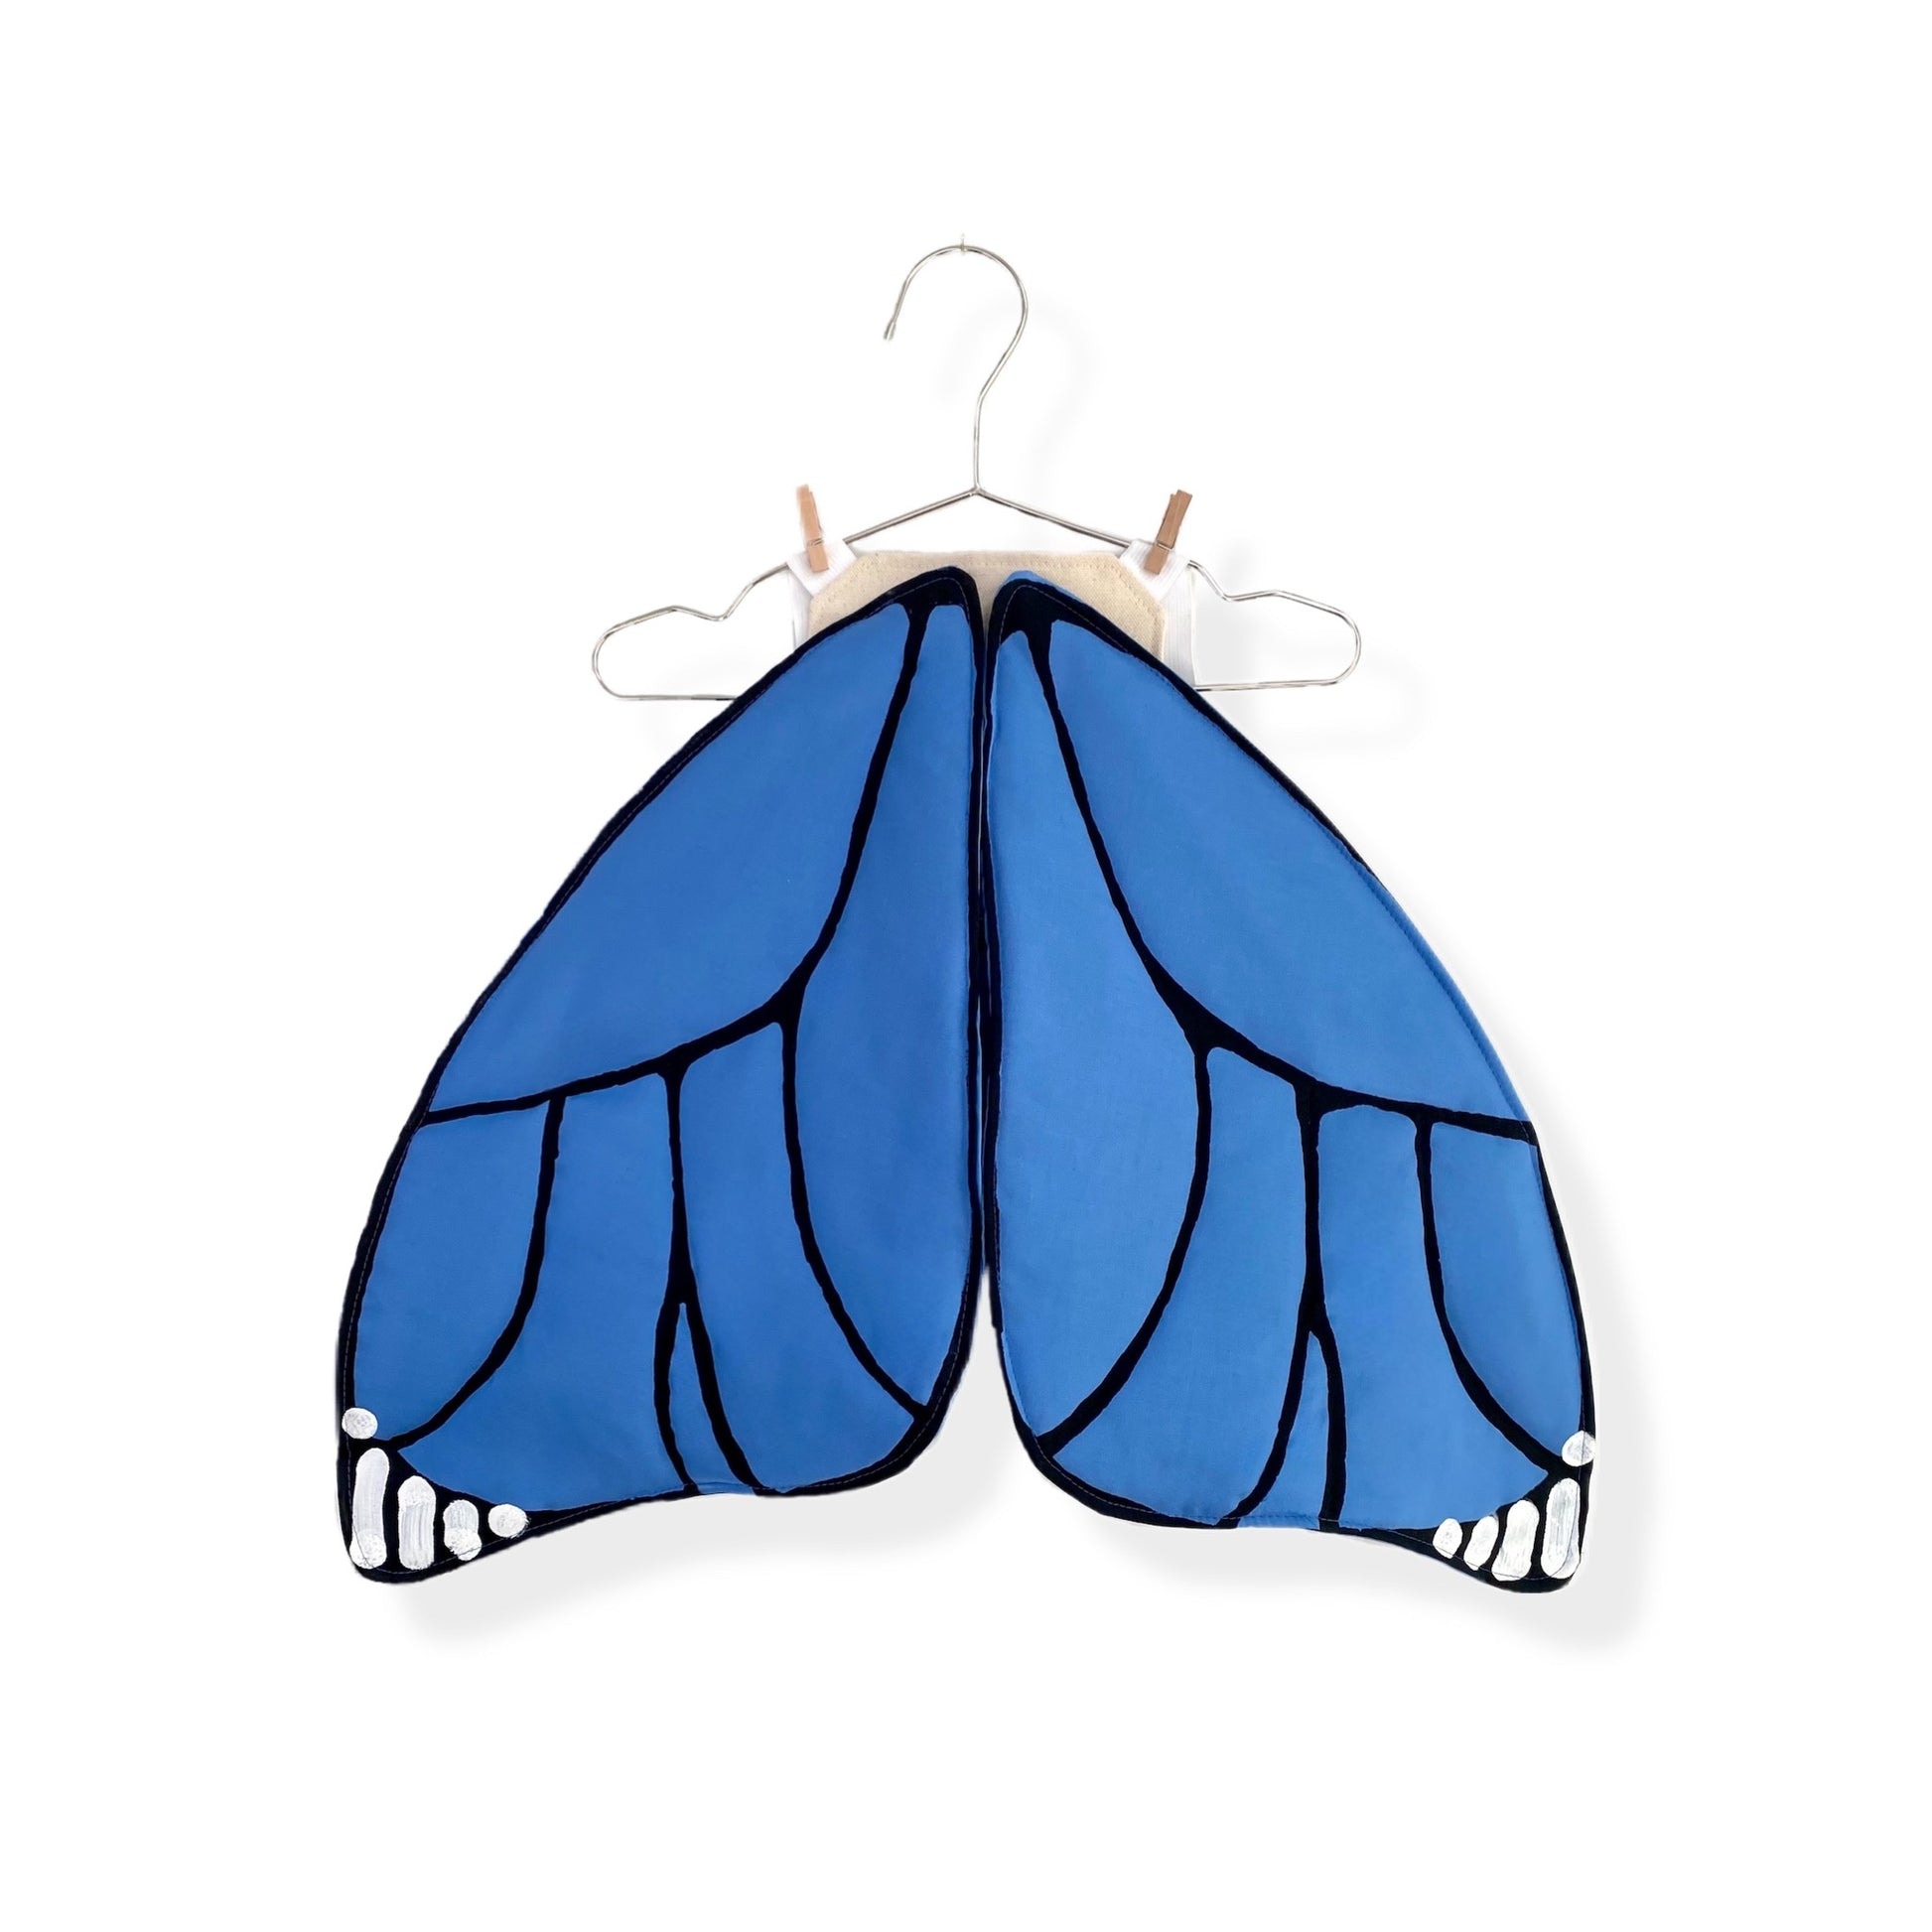 Blue monarch butterfly costume for pretend play.